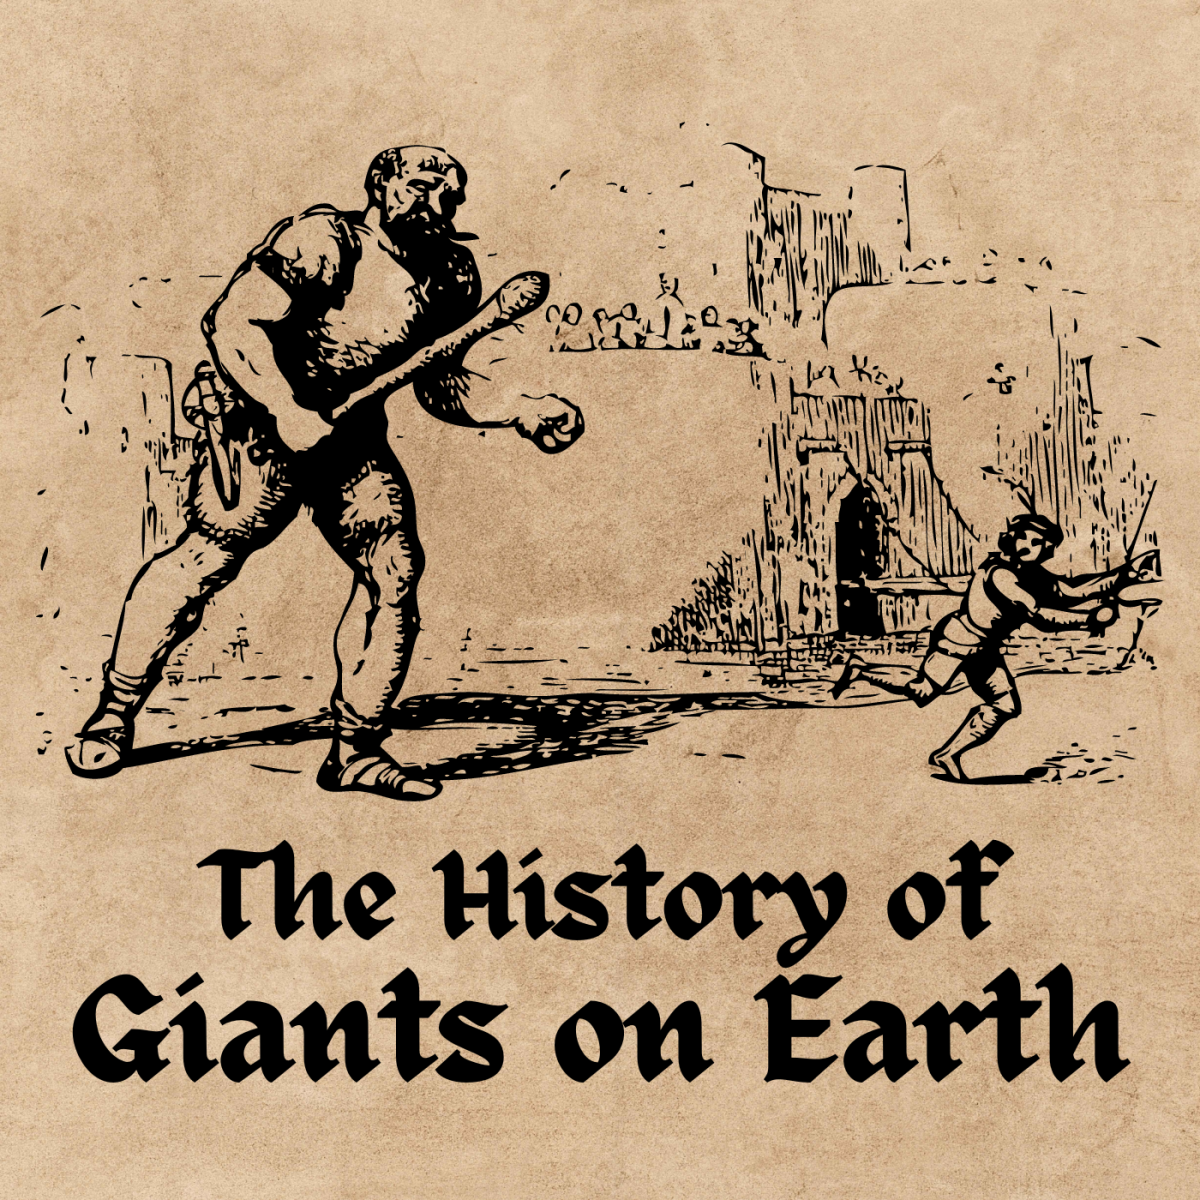 The fascinating legends about giants on Earth.